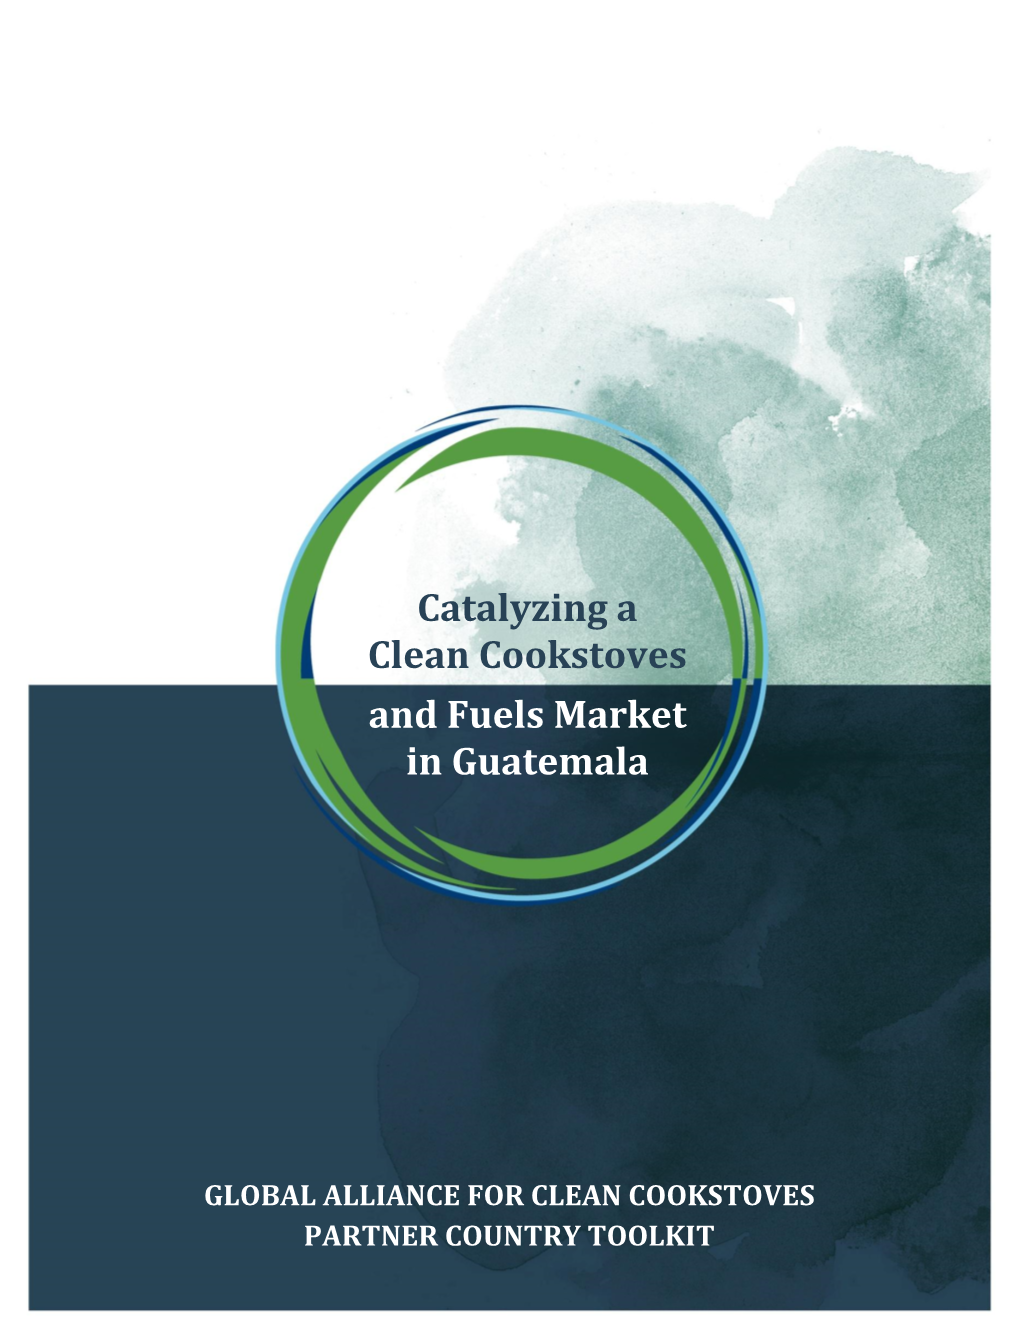 Catalyzing a Clean Cookstoves and Fuels Market in Guatemala